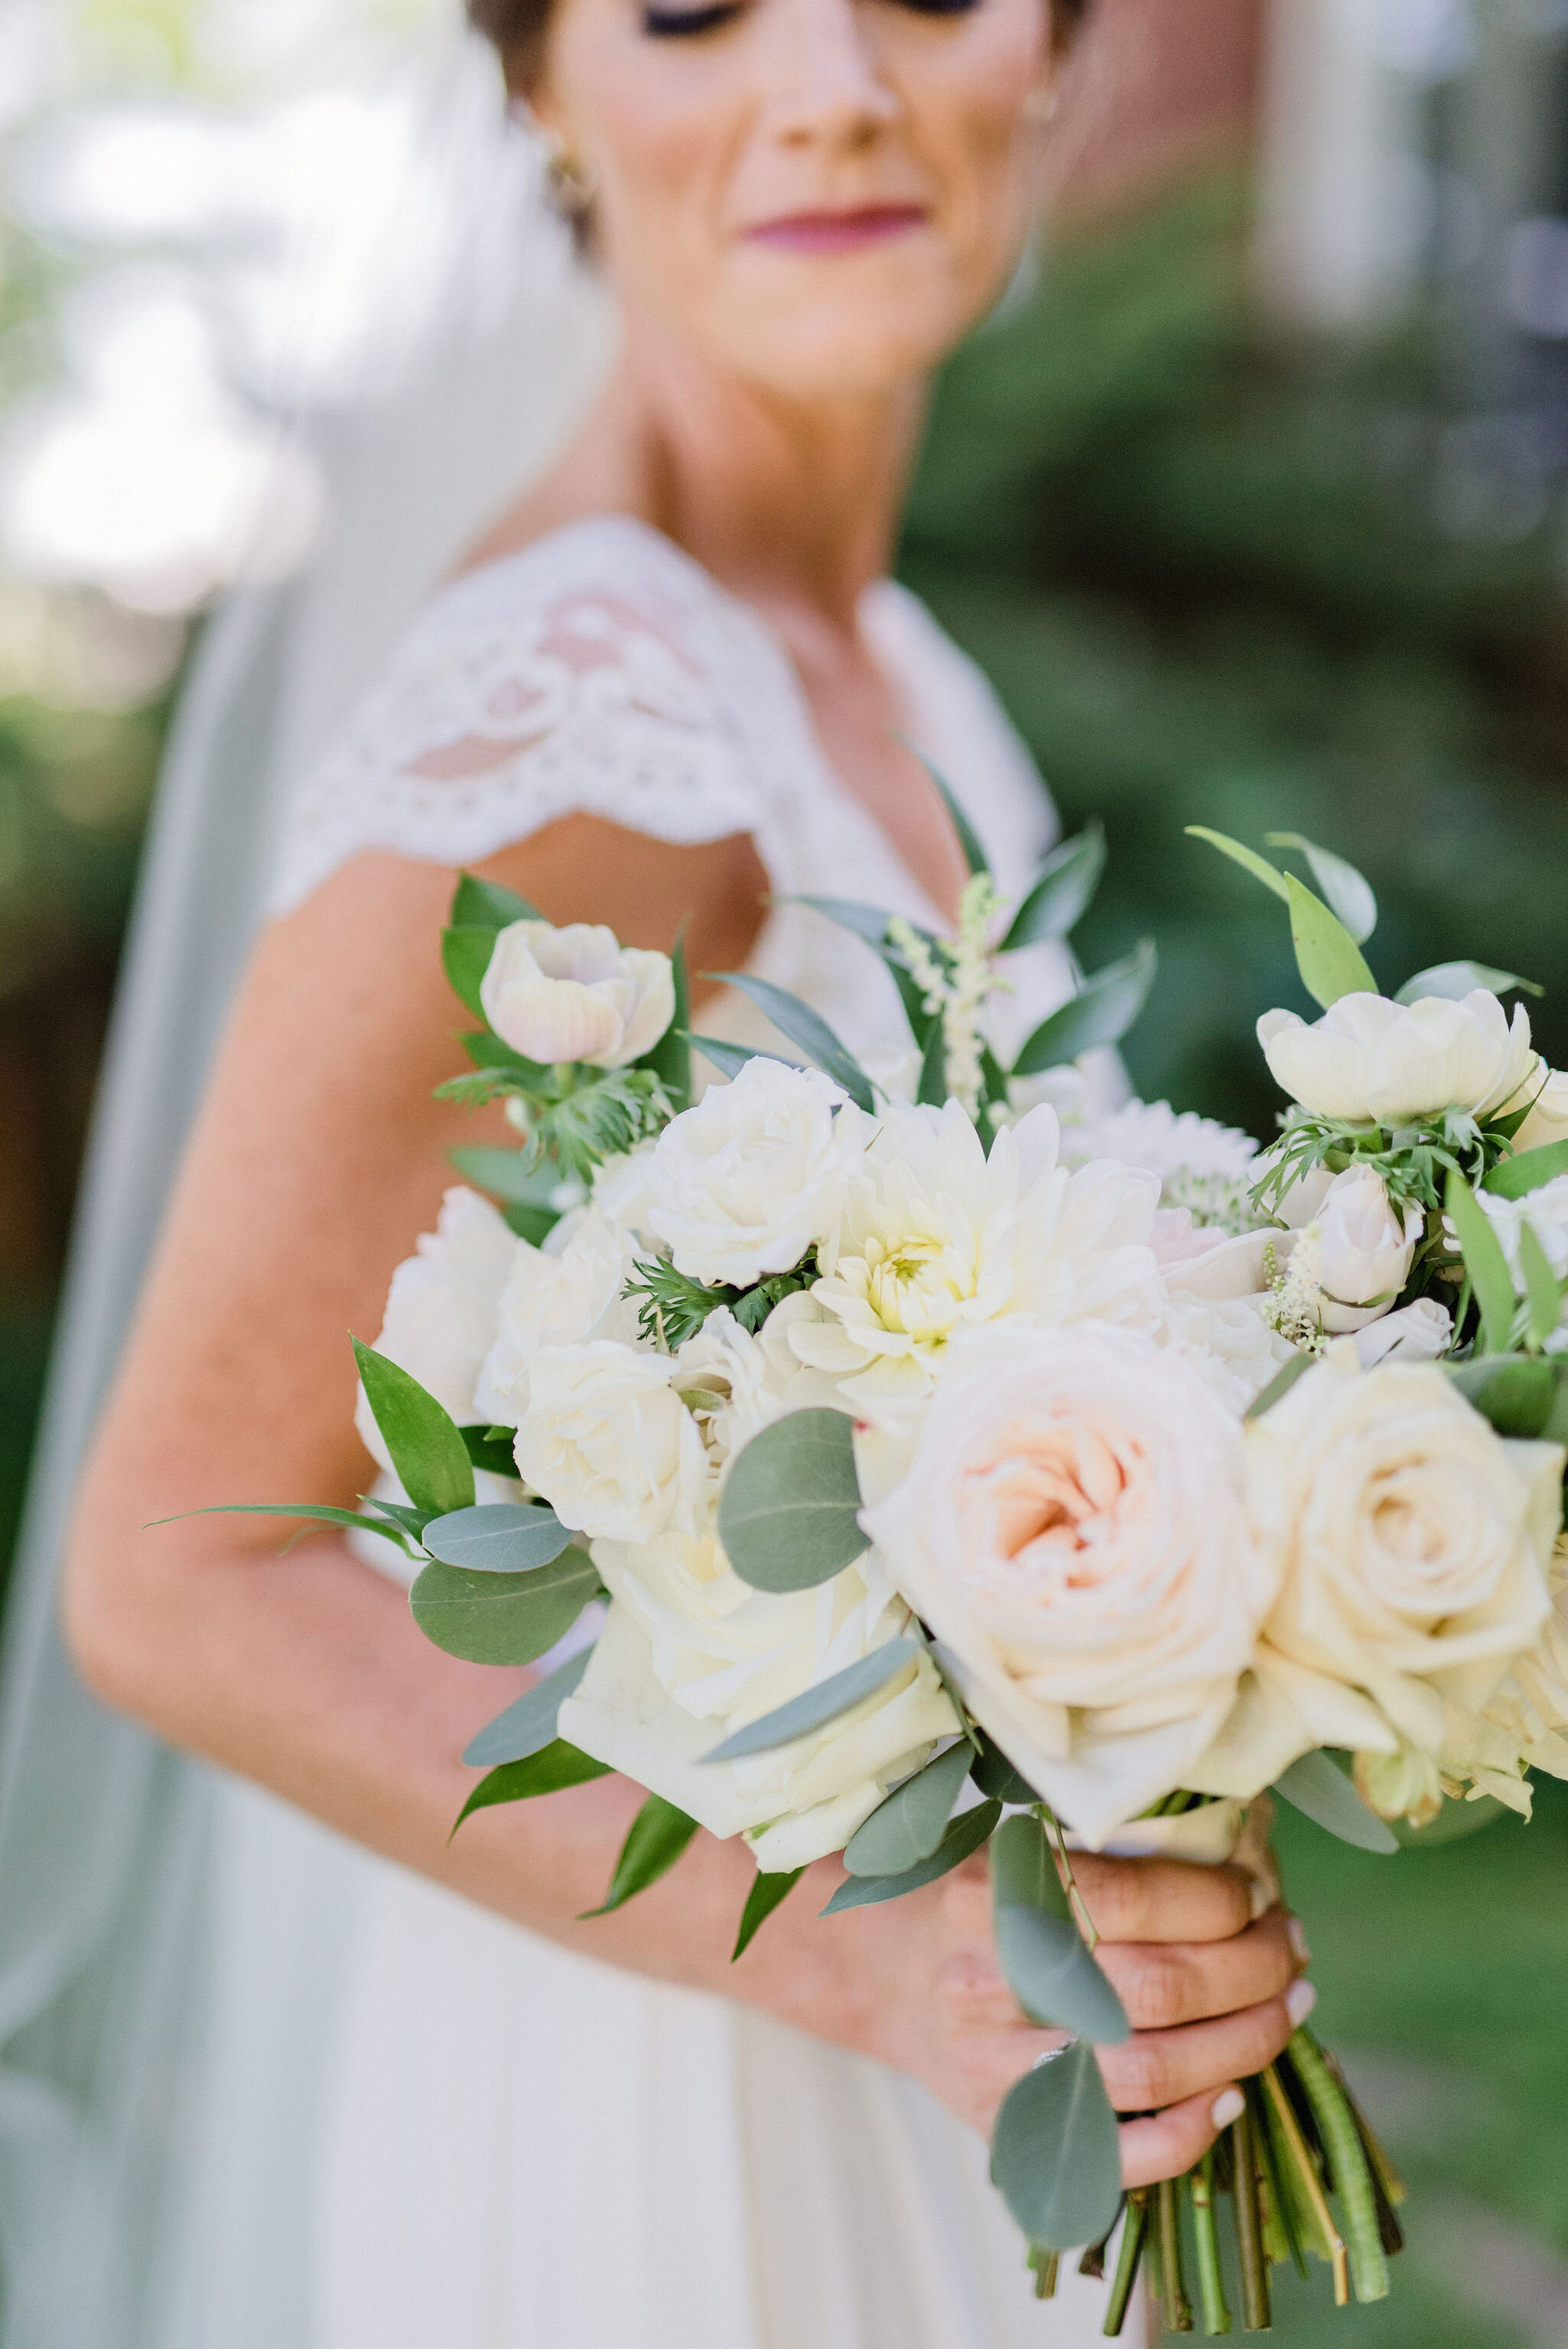 white and blush wedding bouquet with roses and greenery being held by the bride who is glancing down at it